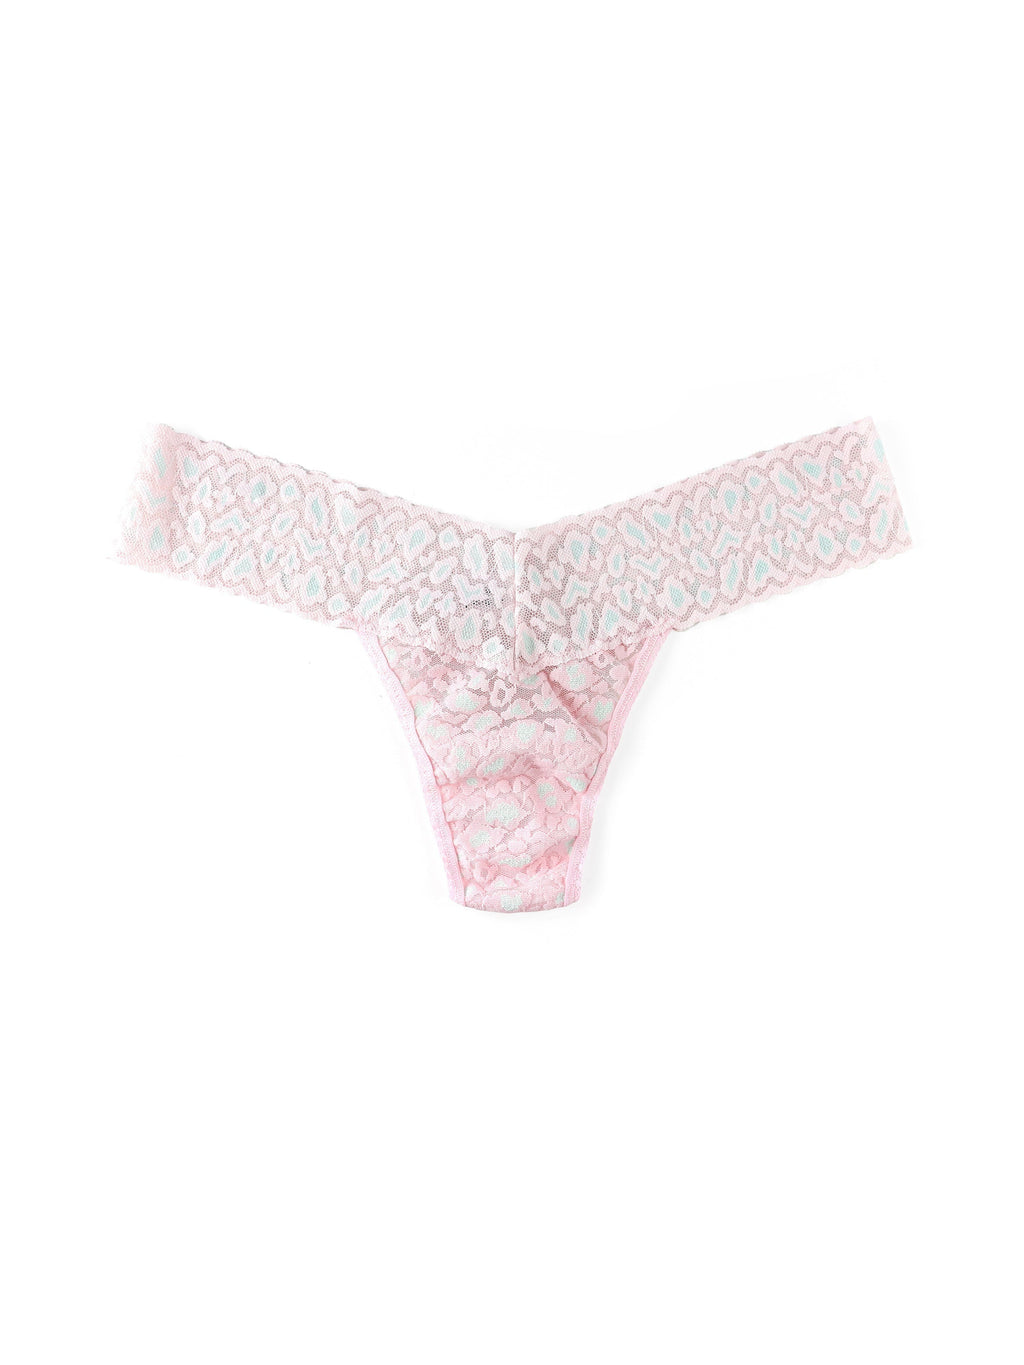 Cross-Dyed Leopard Low Rise Thong Monday Morning | Hanky Panky